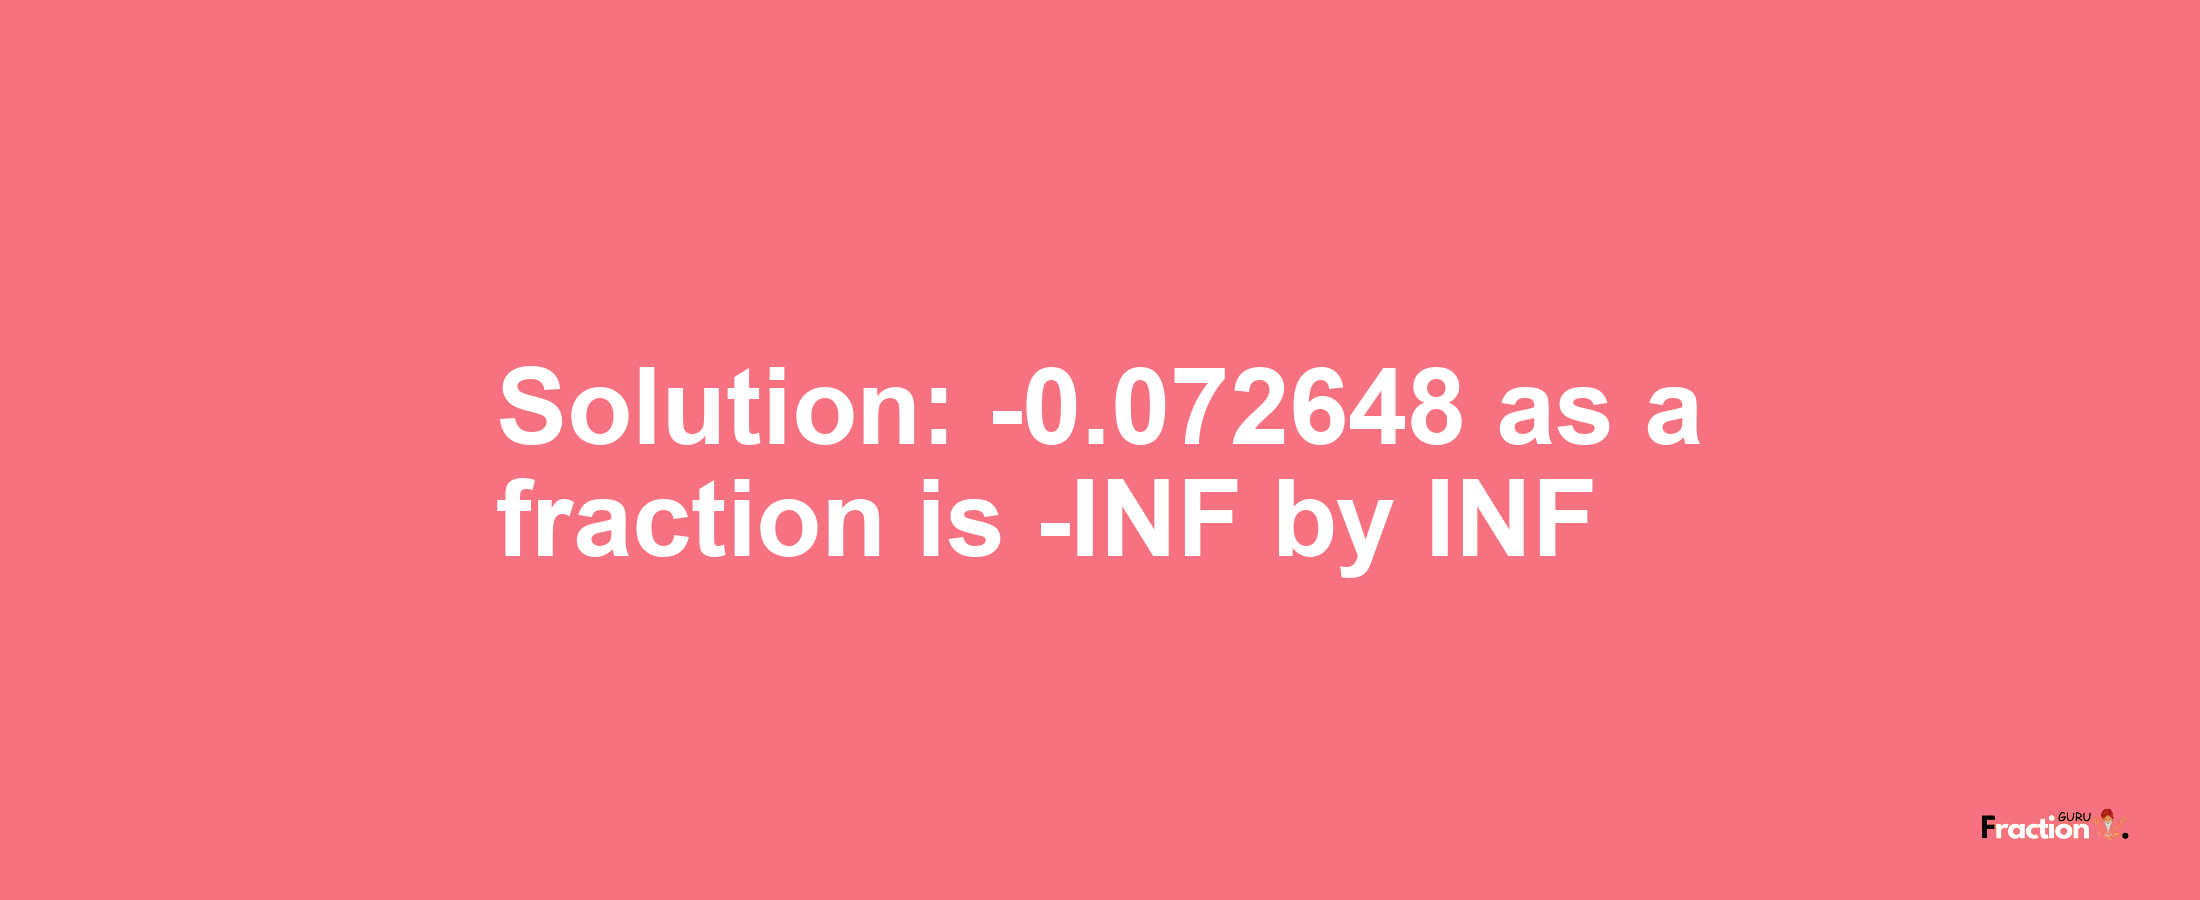 Solution:-0.072648 as a fraction is -INF/INF